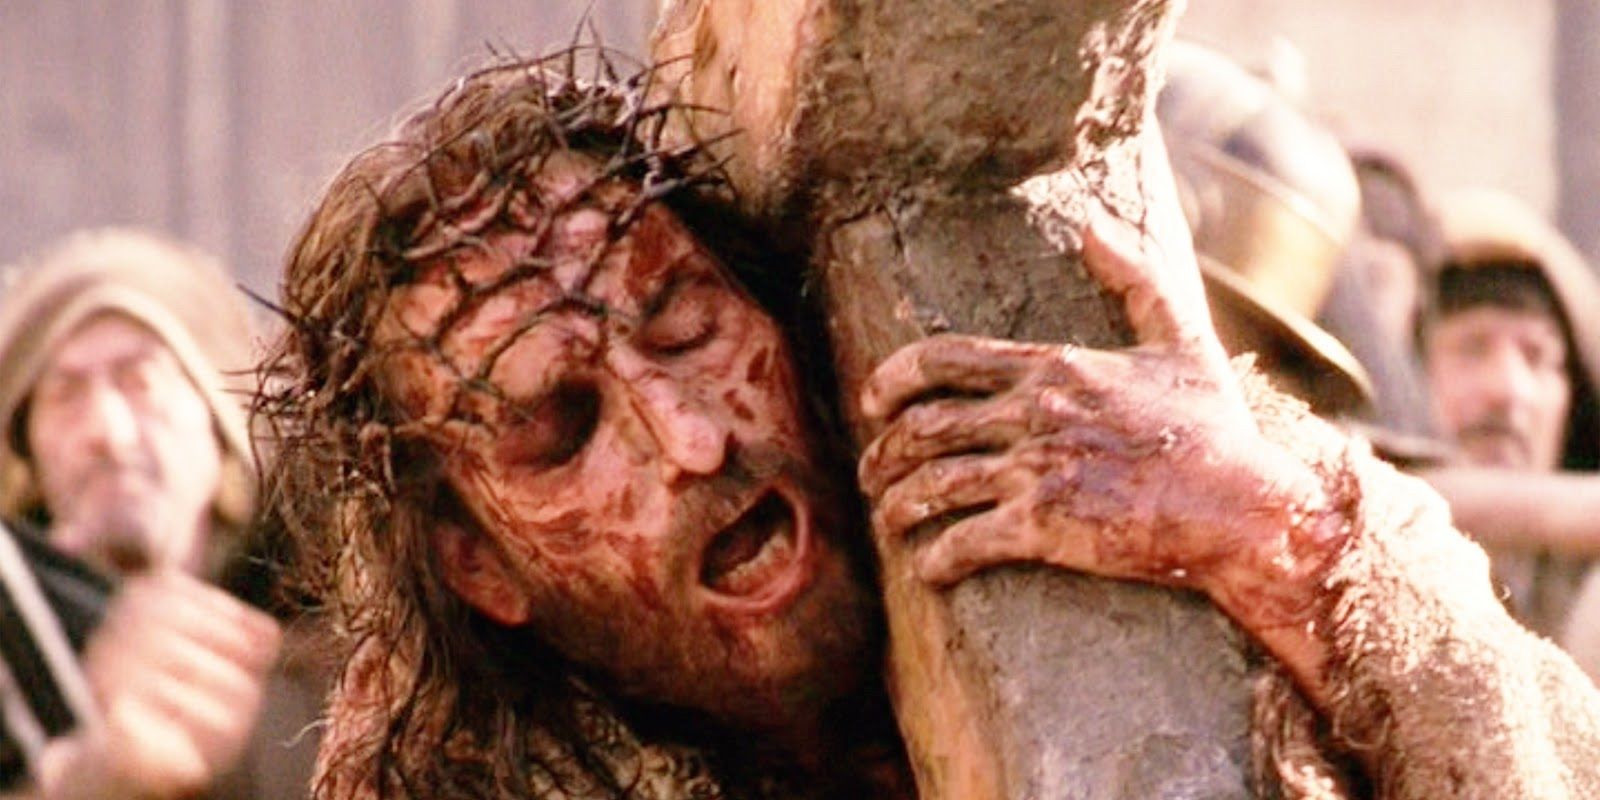 passion of the christ 10 most shockingly violent movies